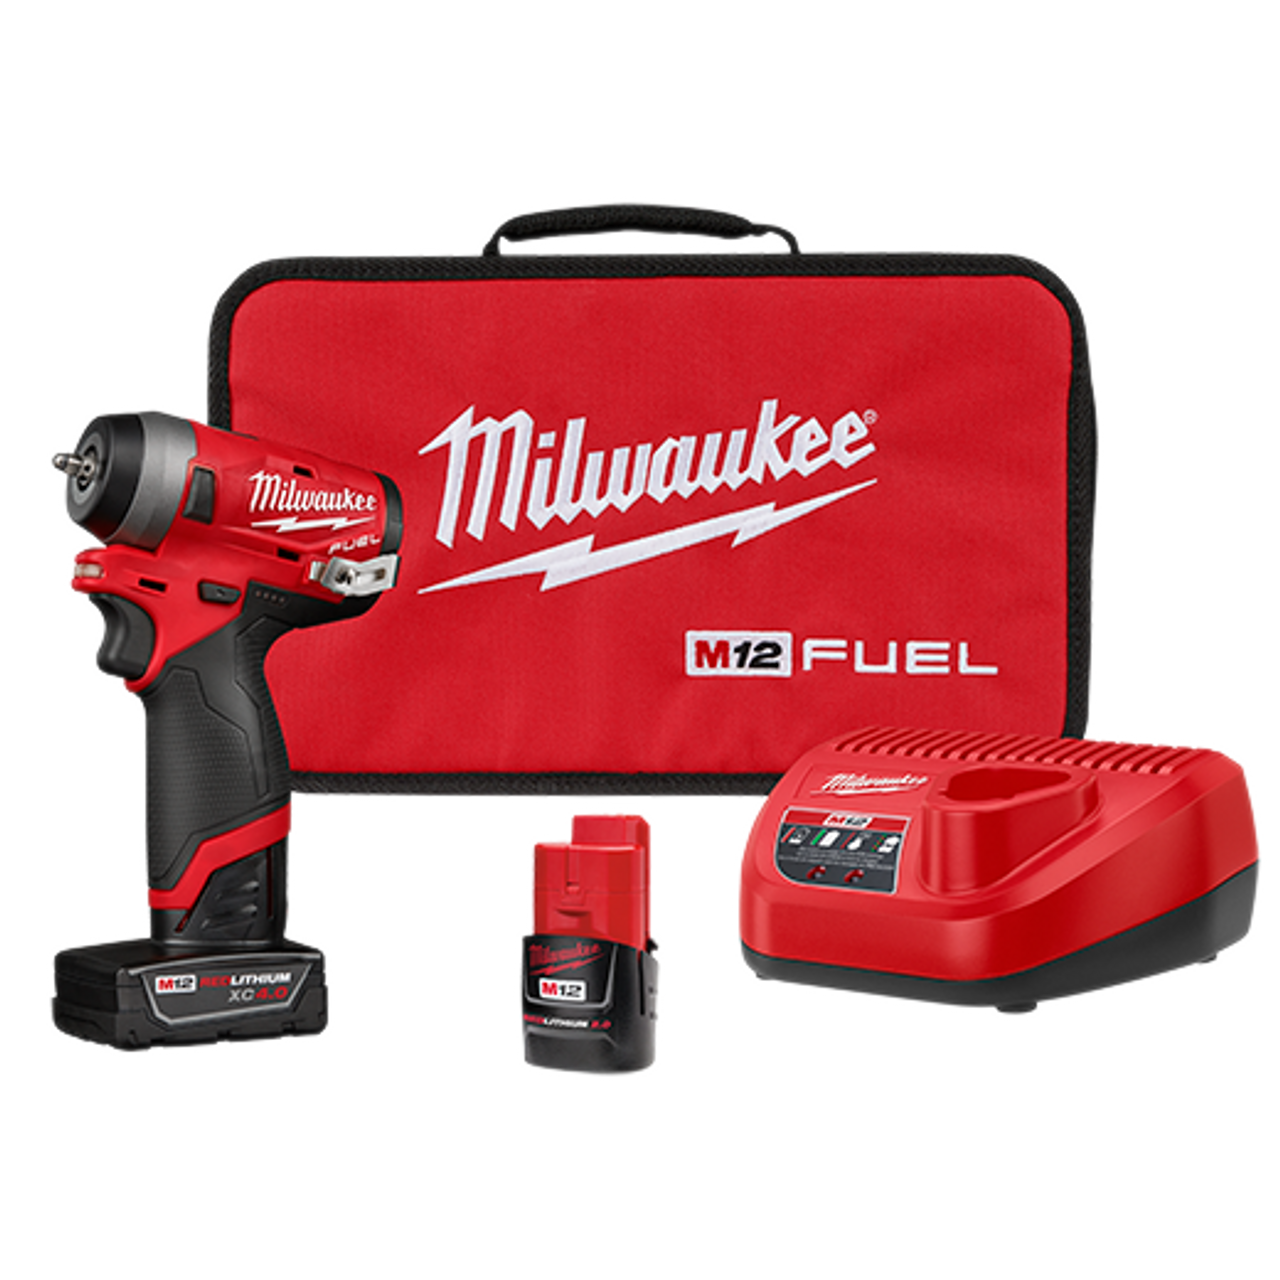 M12 FUEL 1/4" Stubby Impact Wrench Kit